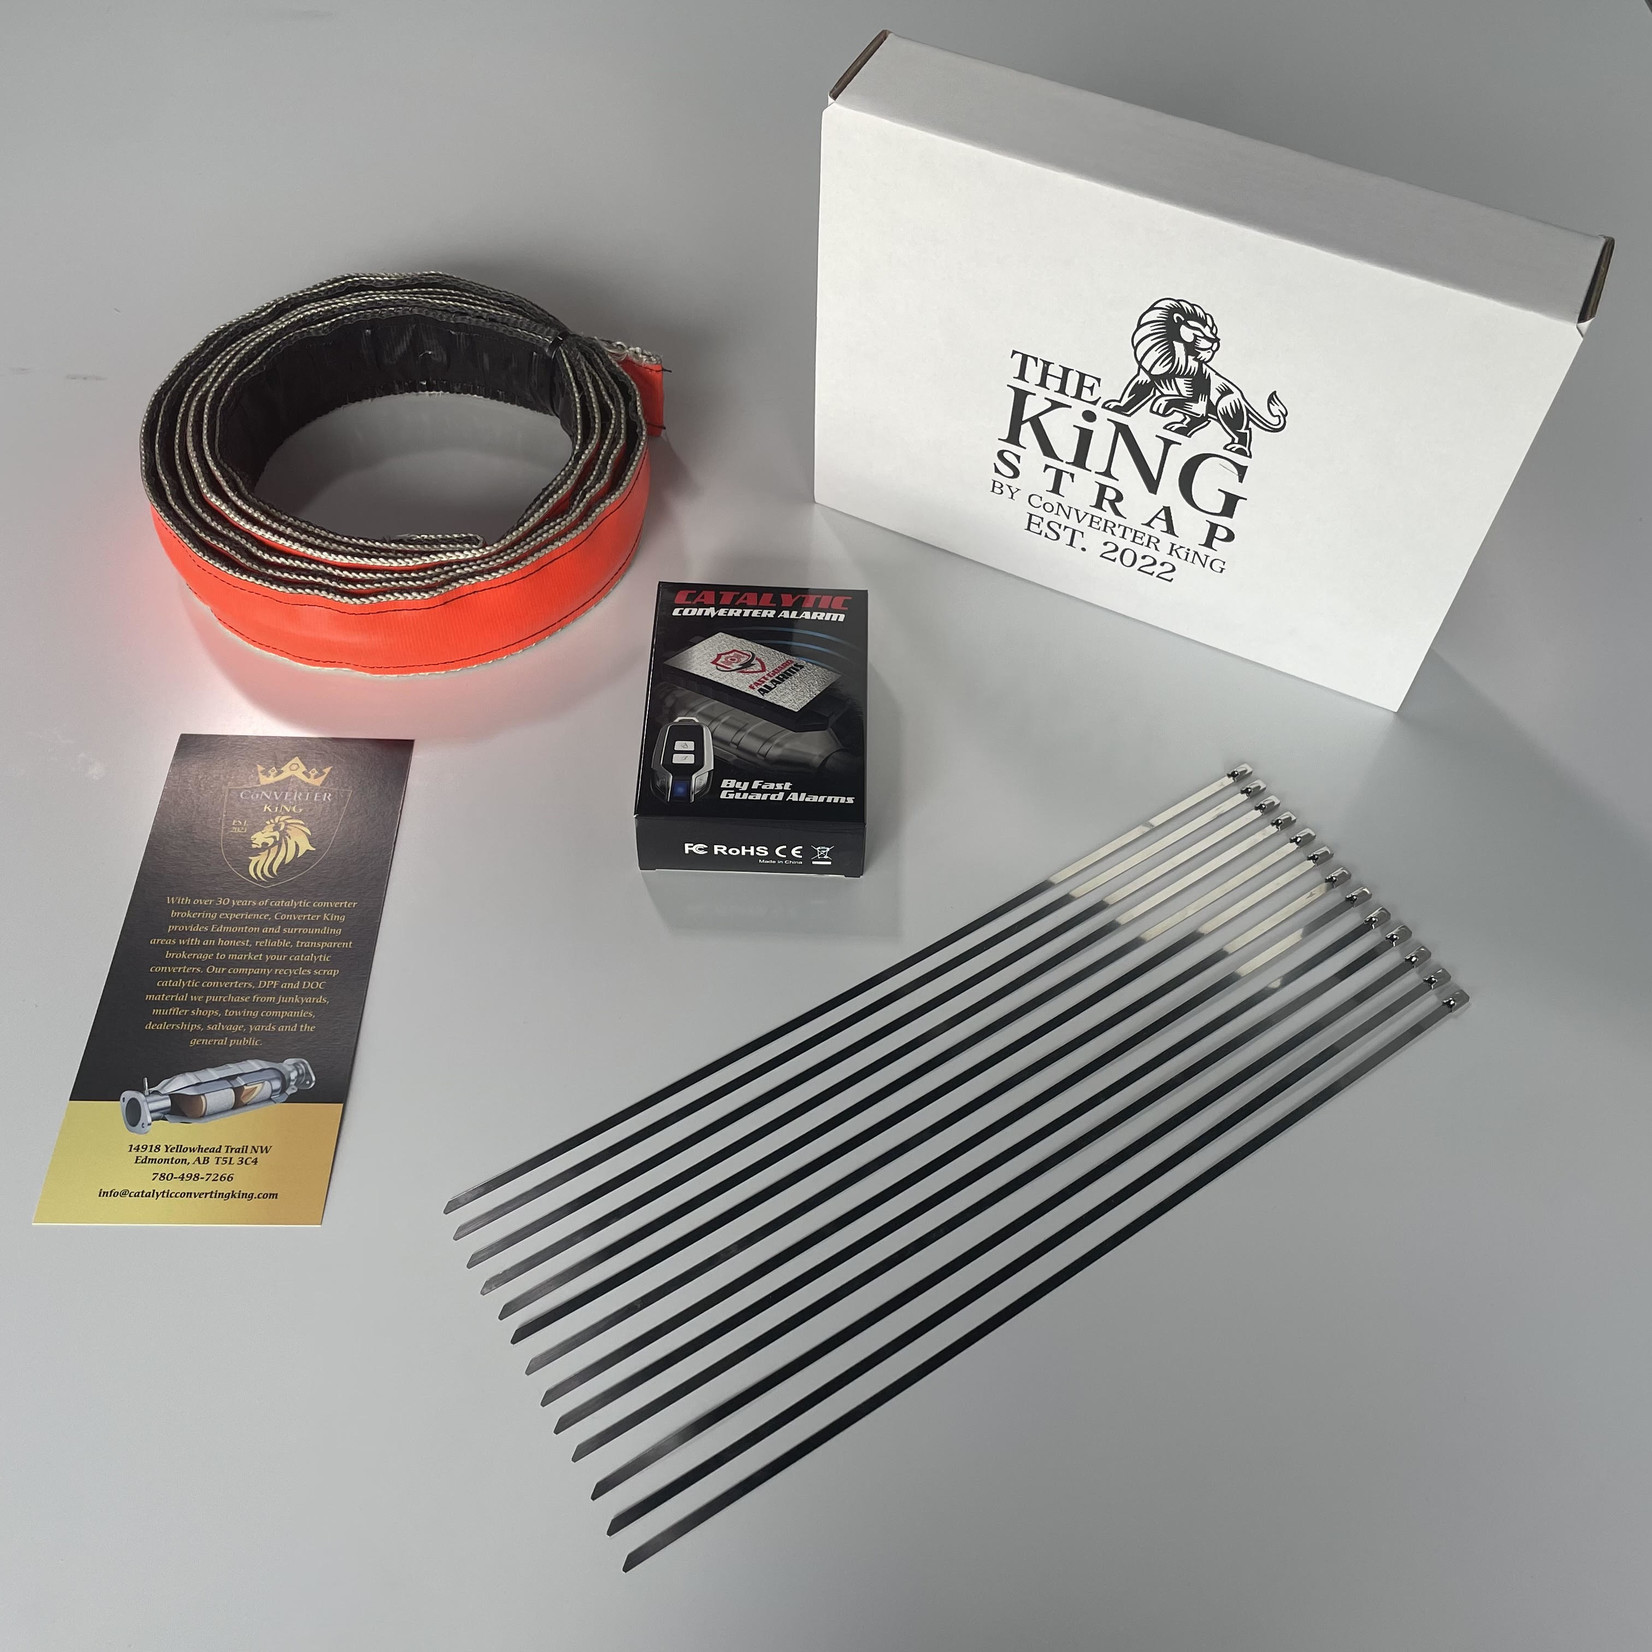 King Strap Package - 12 Foot